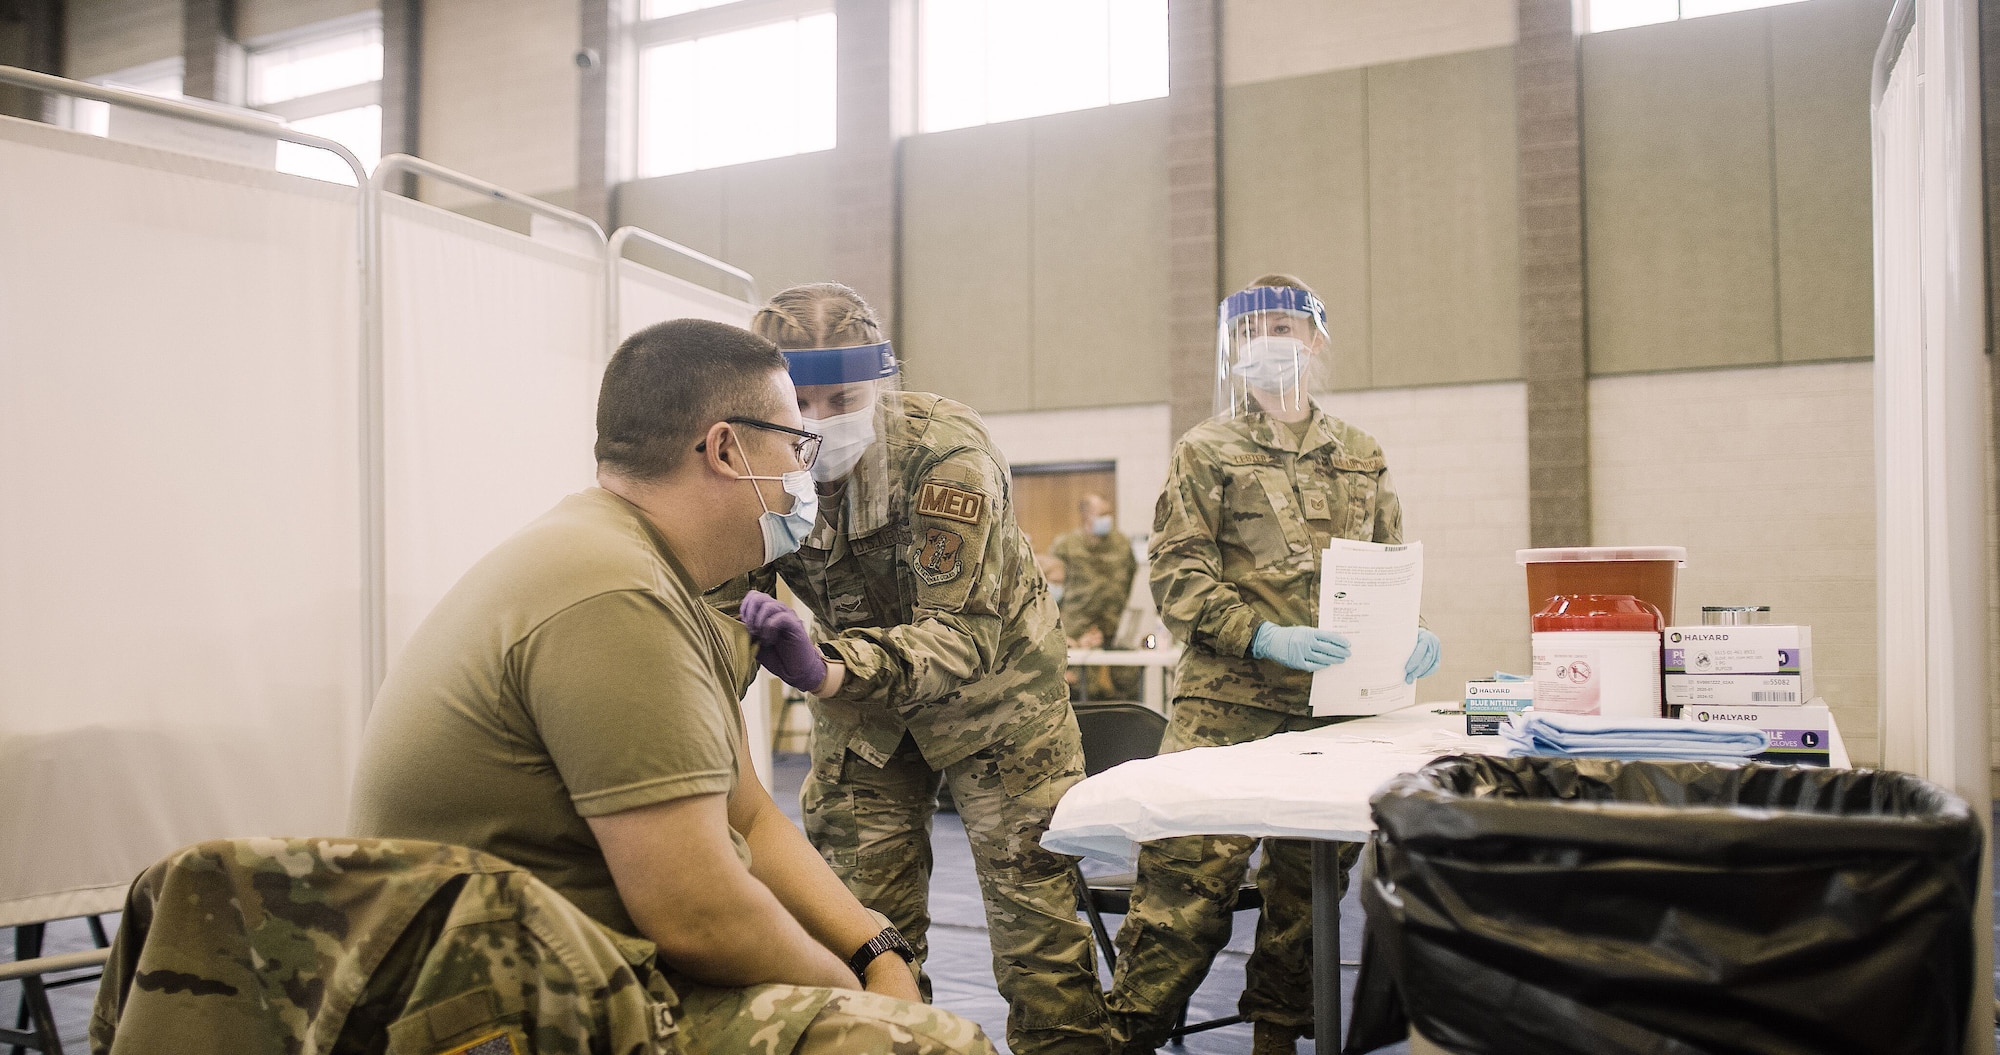 Approximately 200 Indiana National Guard Soldiers and Airmen received the COVID vaccination on Dec. 16, 2020, at the Johnson County Armory in Frankllin, Ind. The Guard members have been on the front lines of the fight against the coronavirus, working at nursing homes, food banks and elsewhere.